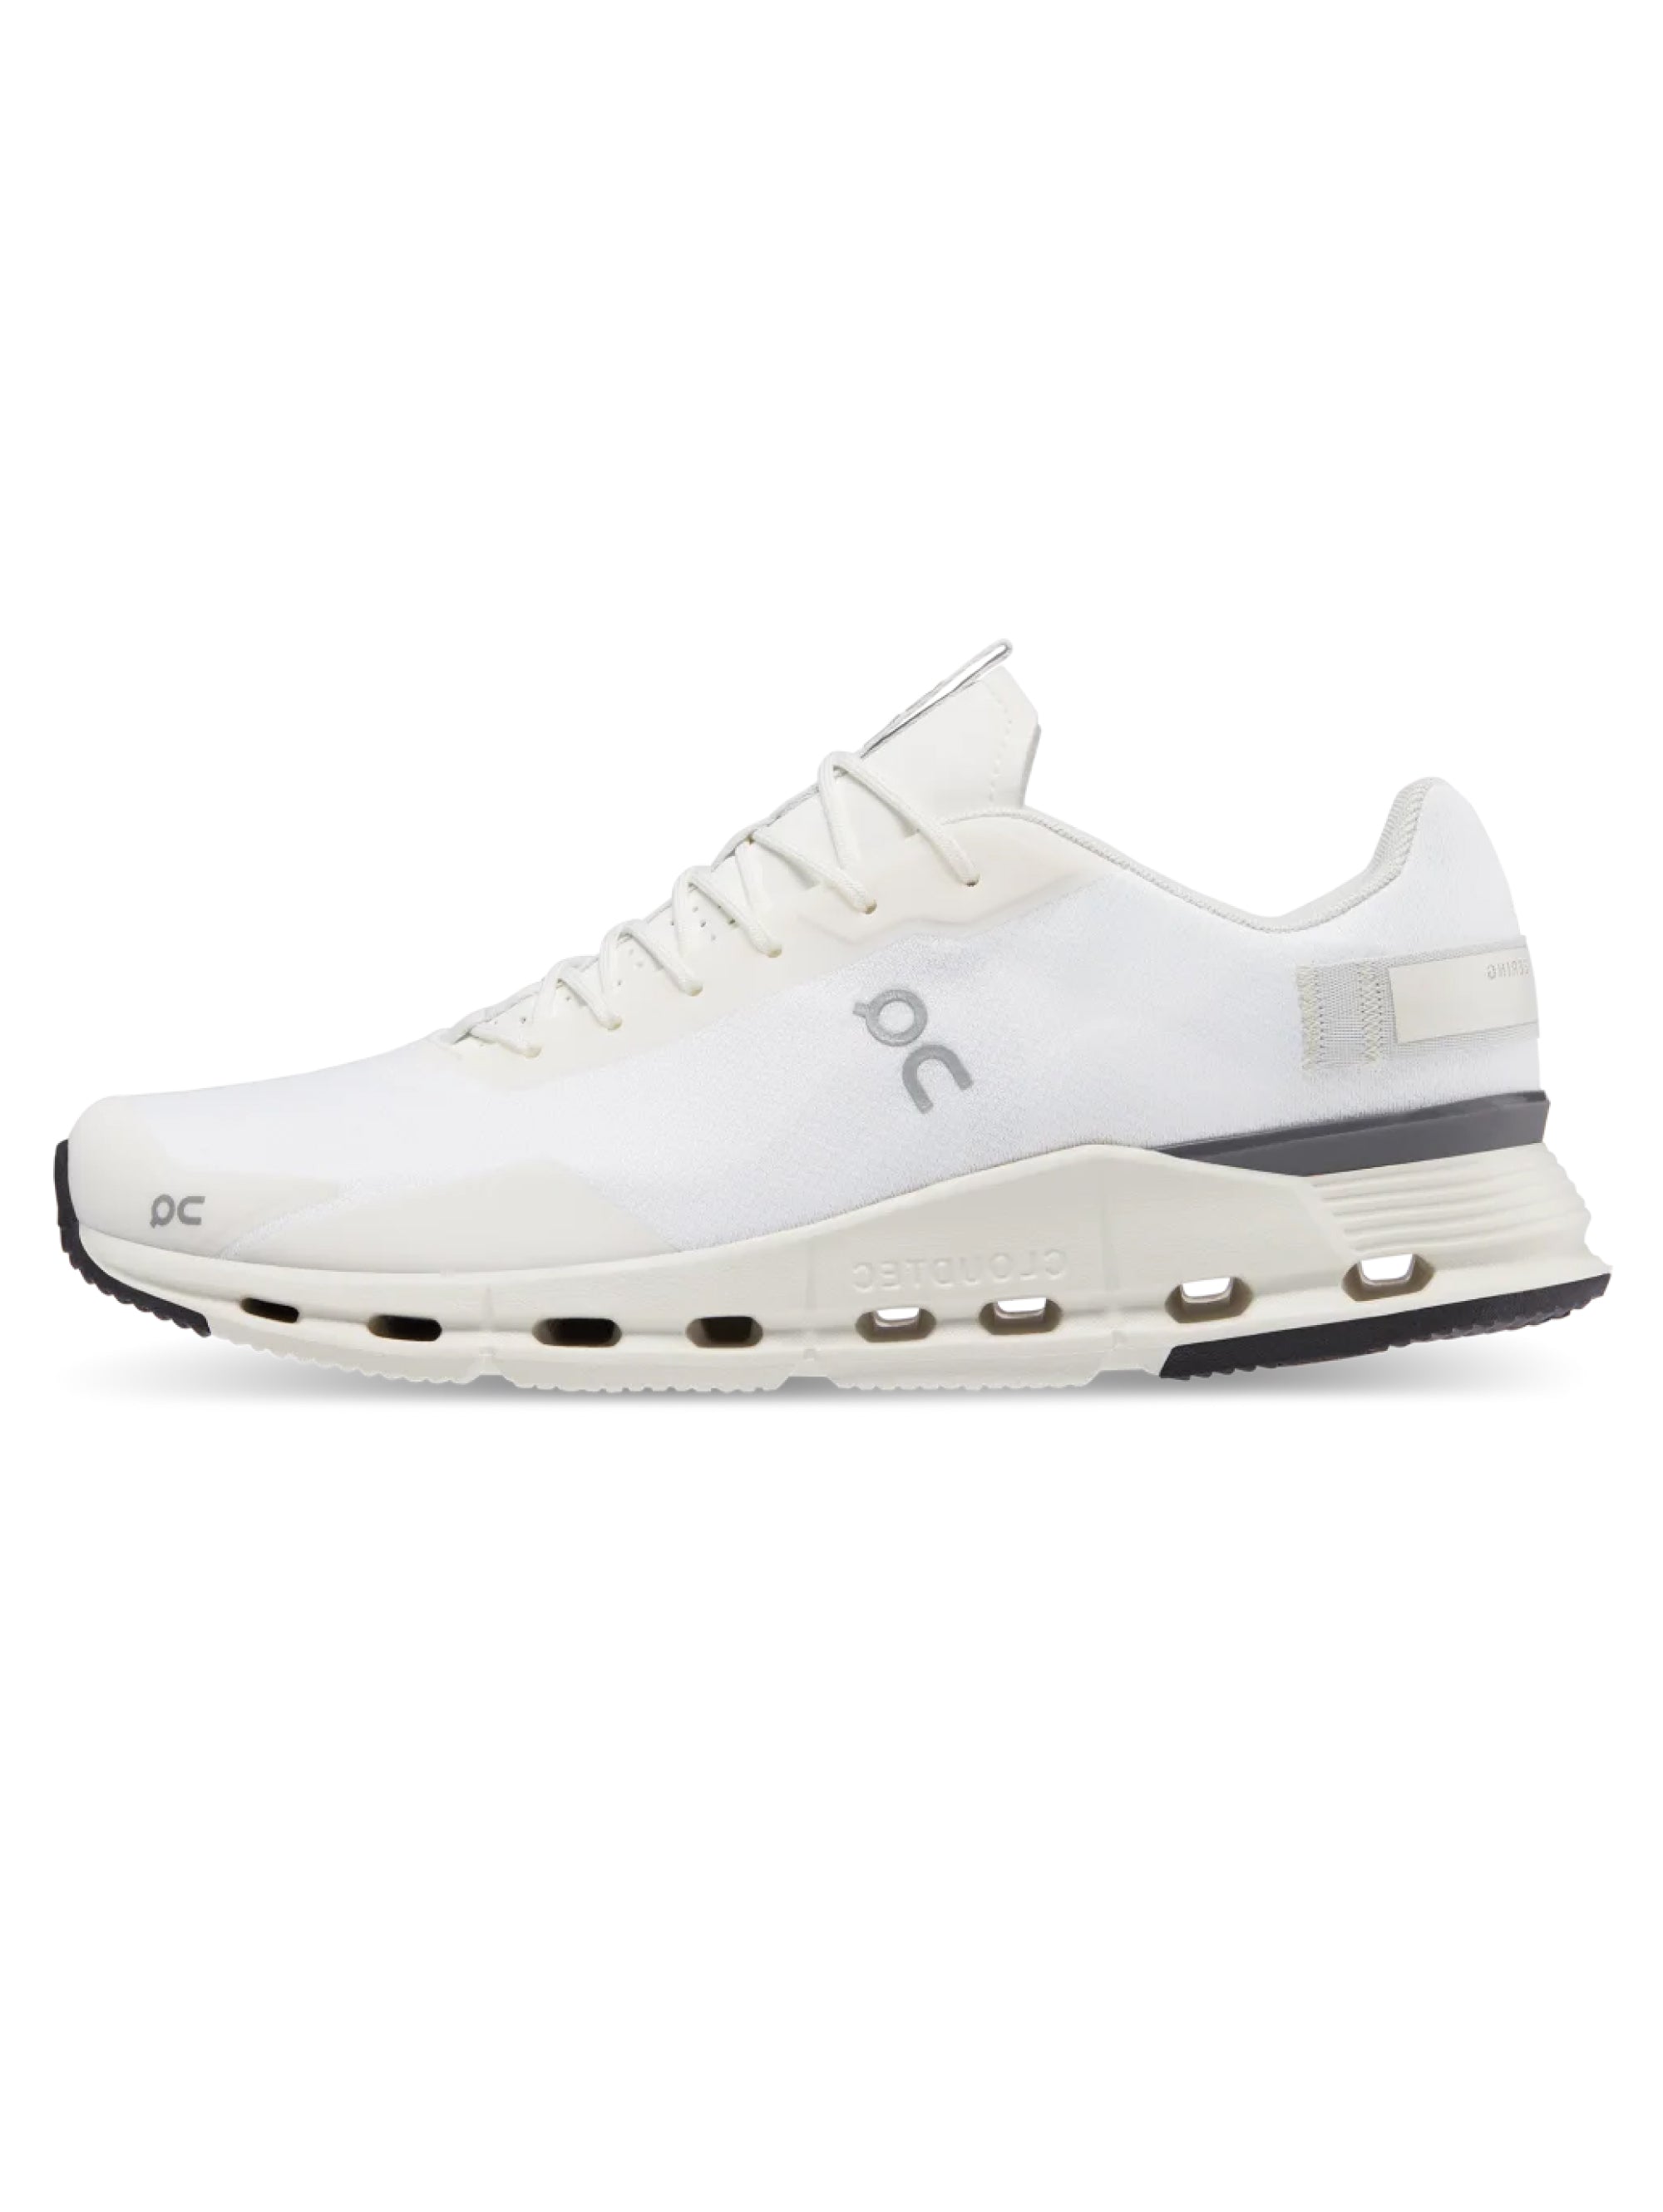 ON RUNNING-Sneakers Cloudnova Form Uomo Bianco/Eclipse-TRYME Shop